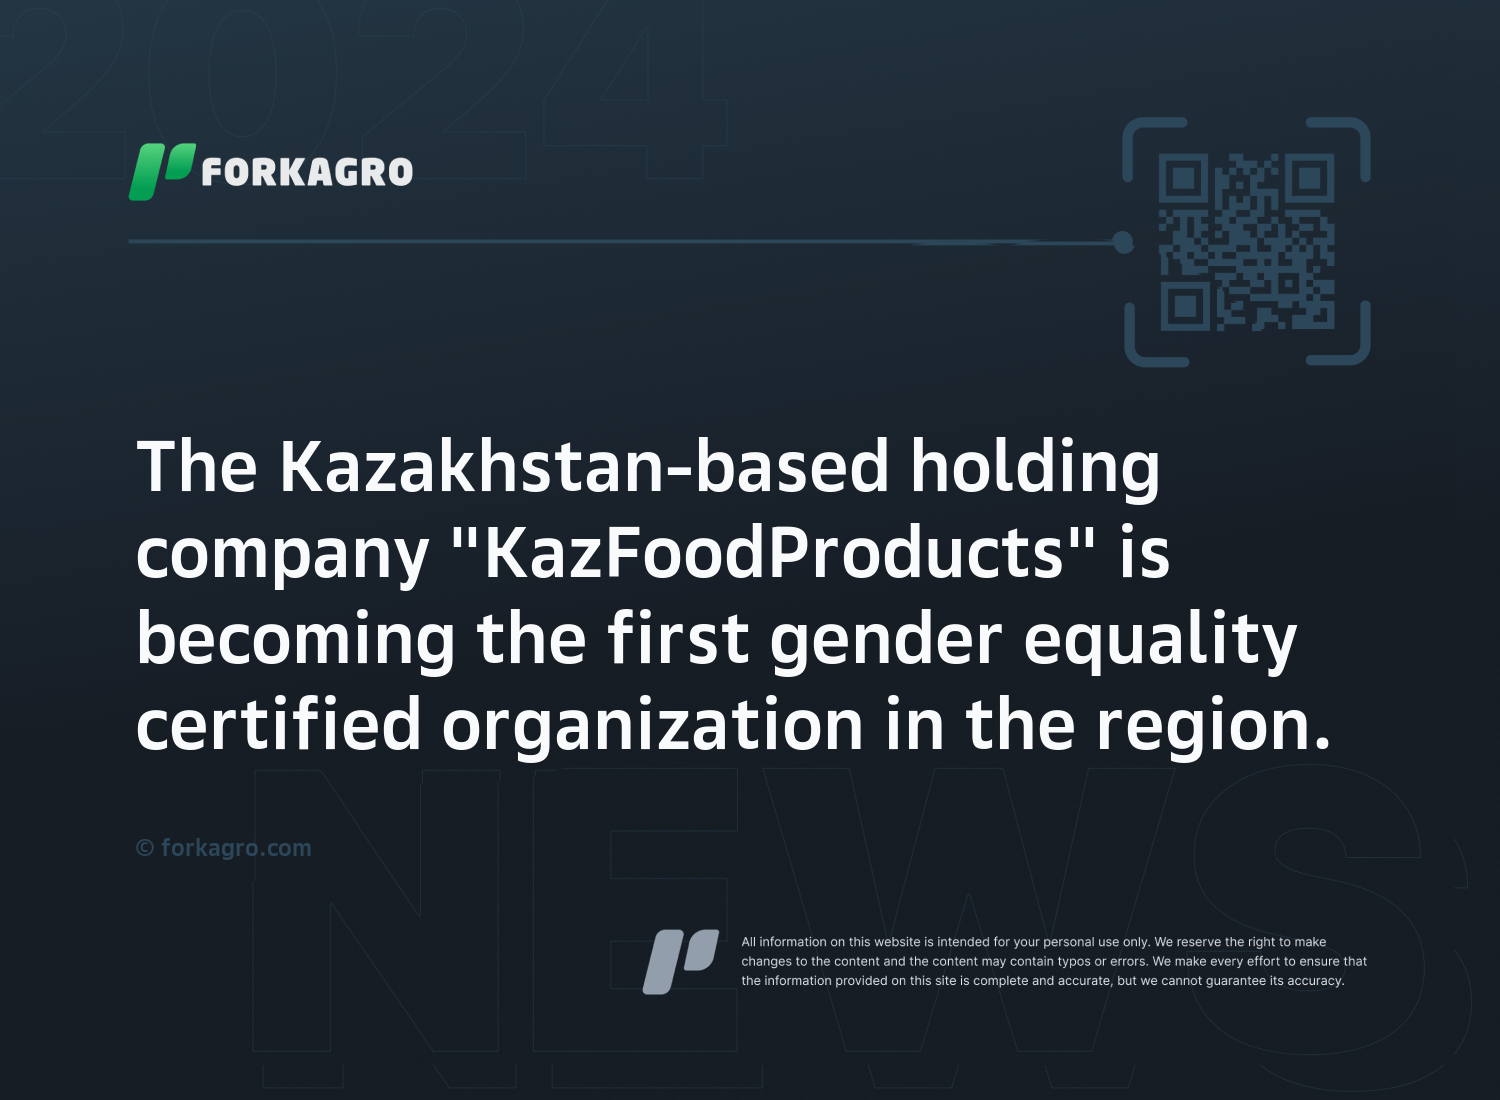 The Kazakhstan-based holding company "KazFoodProducts" is becoming the first gender equality certified organization in the region.